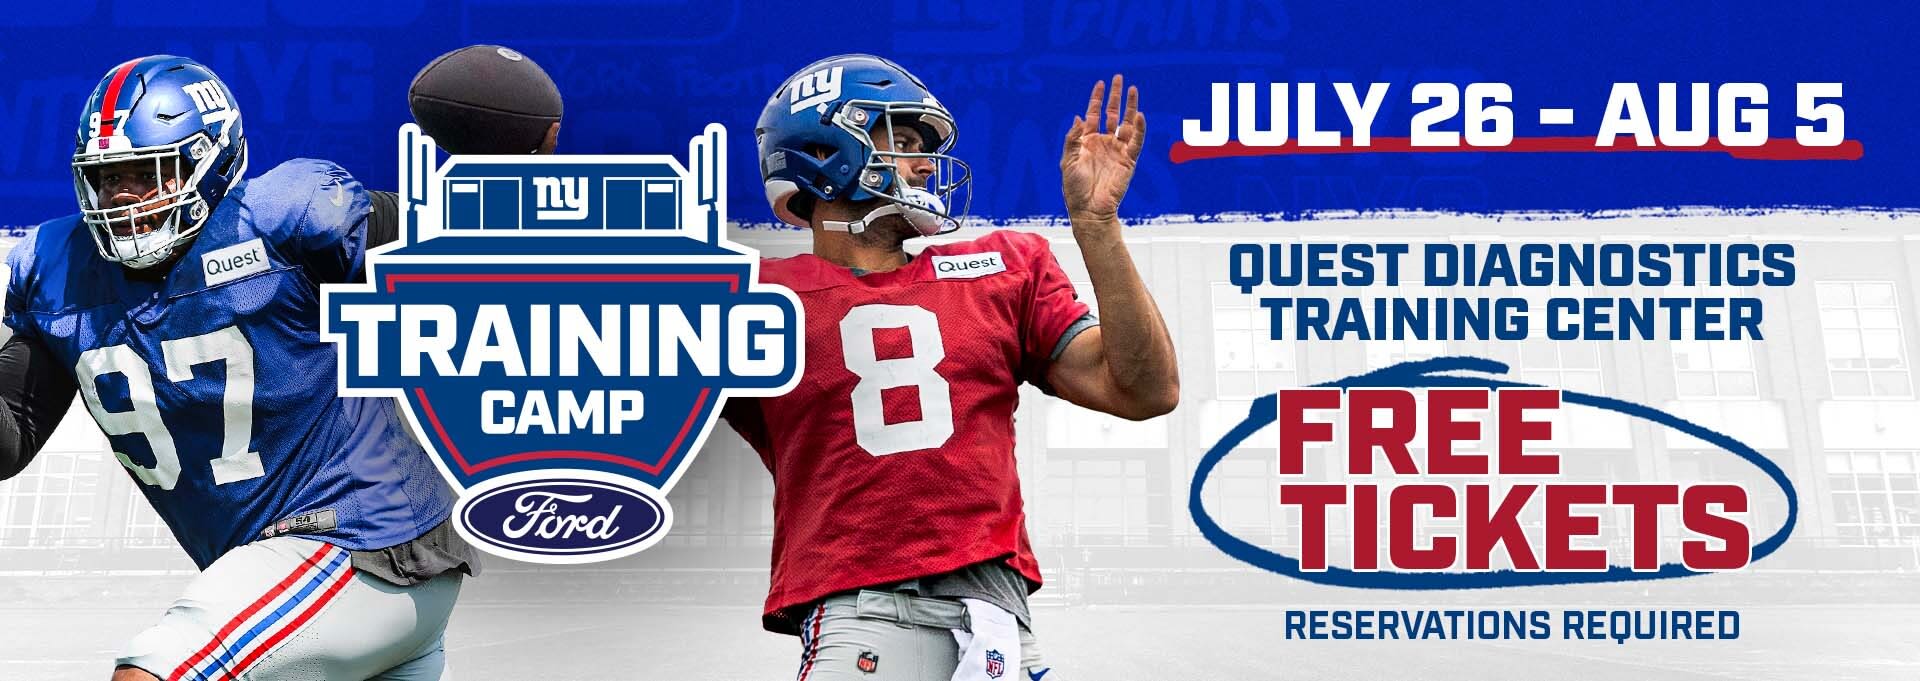 Expecting Big Things From the NY Giants - Here's Where to Get Tickets